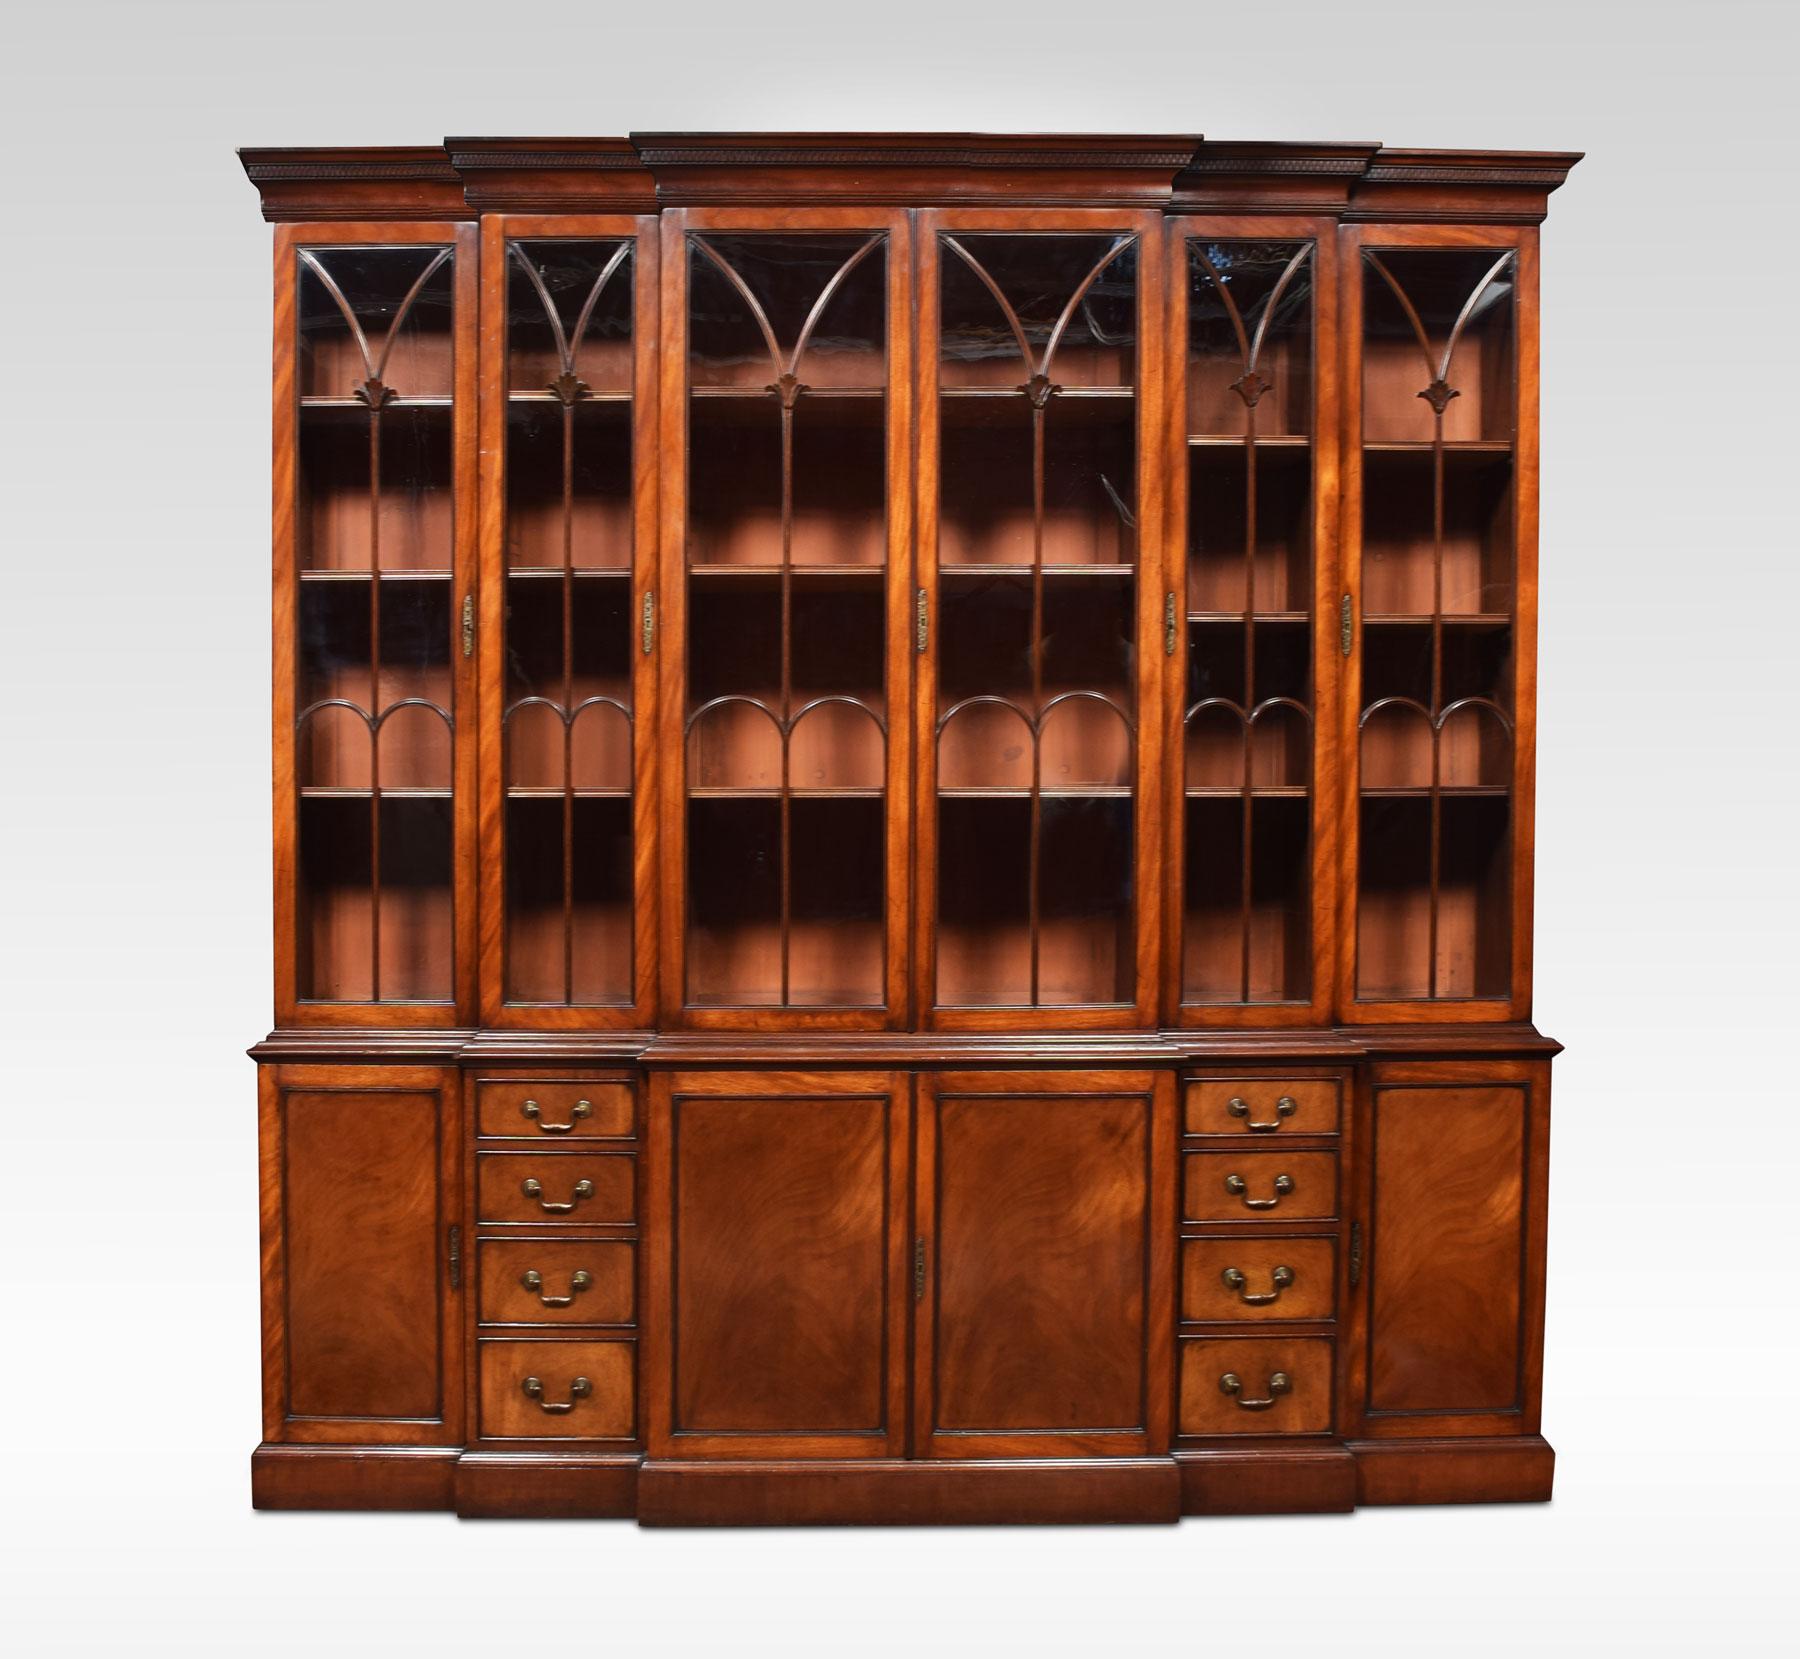 George III style mahogany breakfront bookcase. The molded cornice with carved frieze over two central cupboard doors with arched beaded glass, with stylized floral decoration. Flanked on each side by narrow cupboards and a wider cupboard, fitted